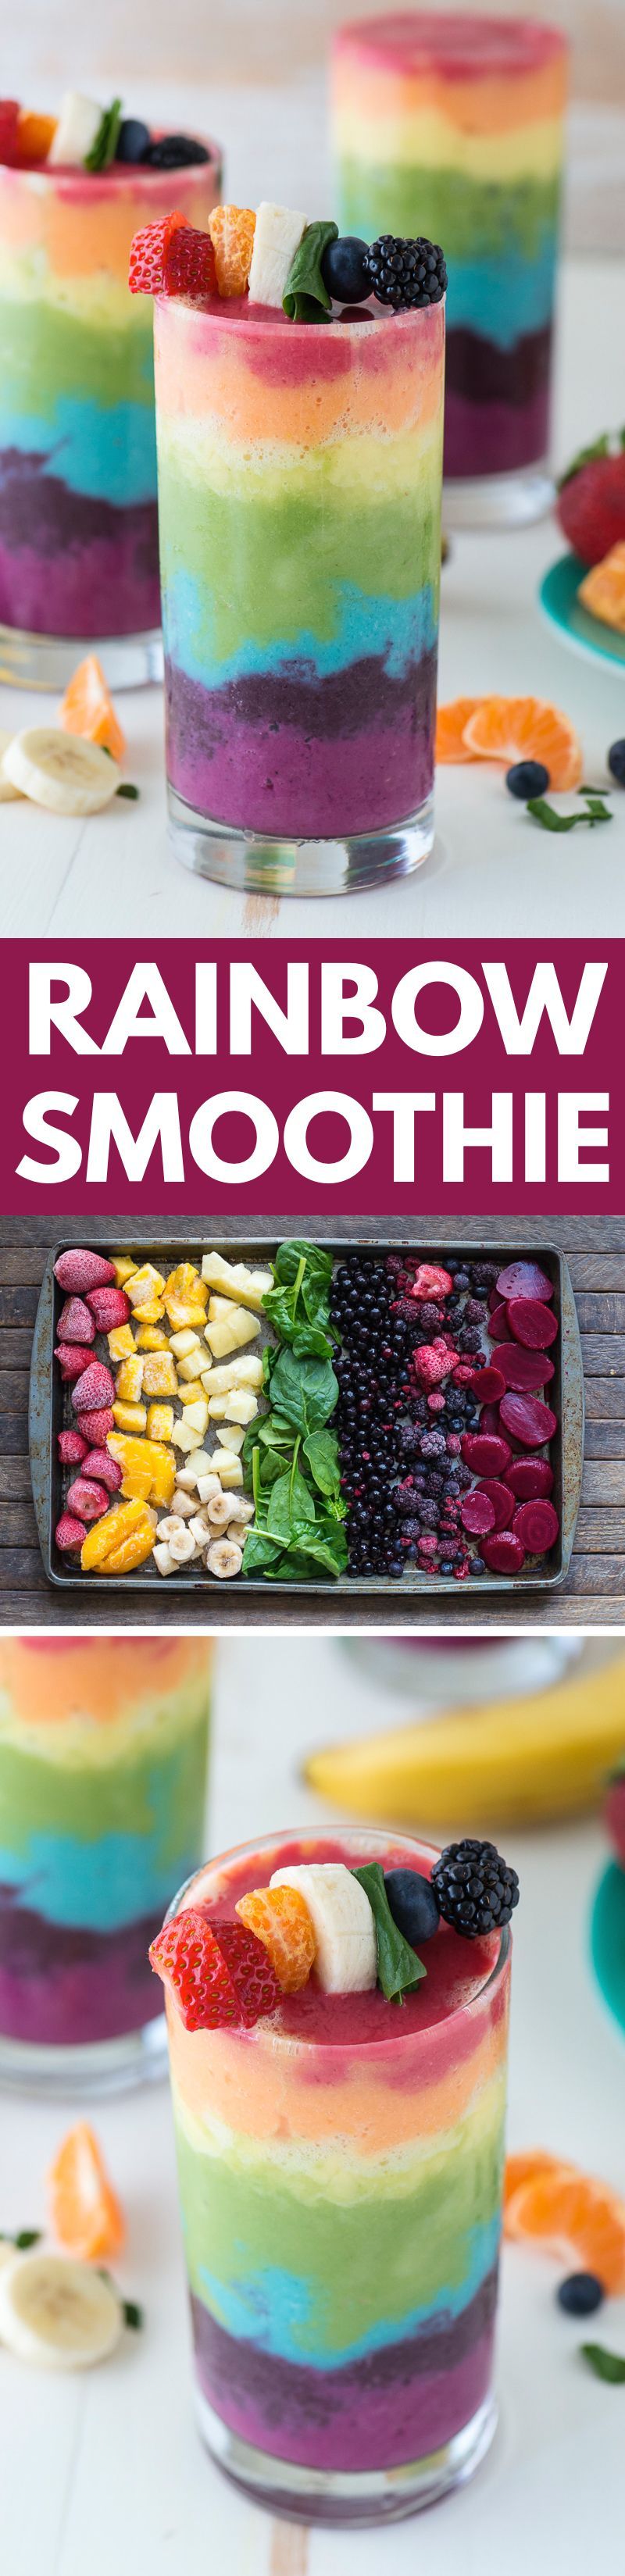 Beautiful 7 layer rainbow smoothie recipe! Full of tons of fruit and topped with a fruit skewer, it’s the ultimate rainbow